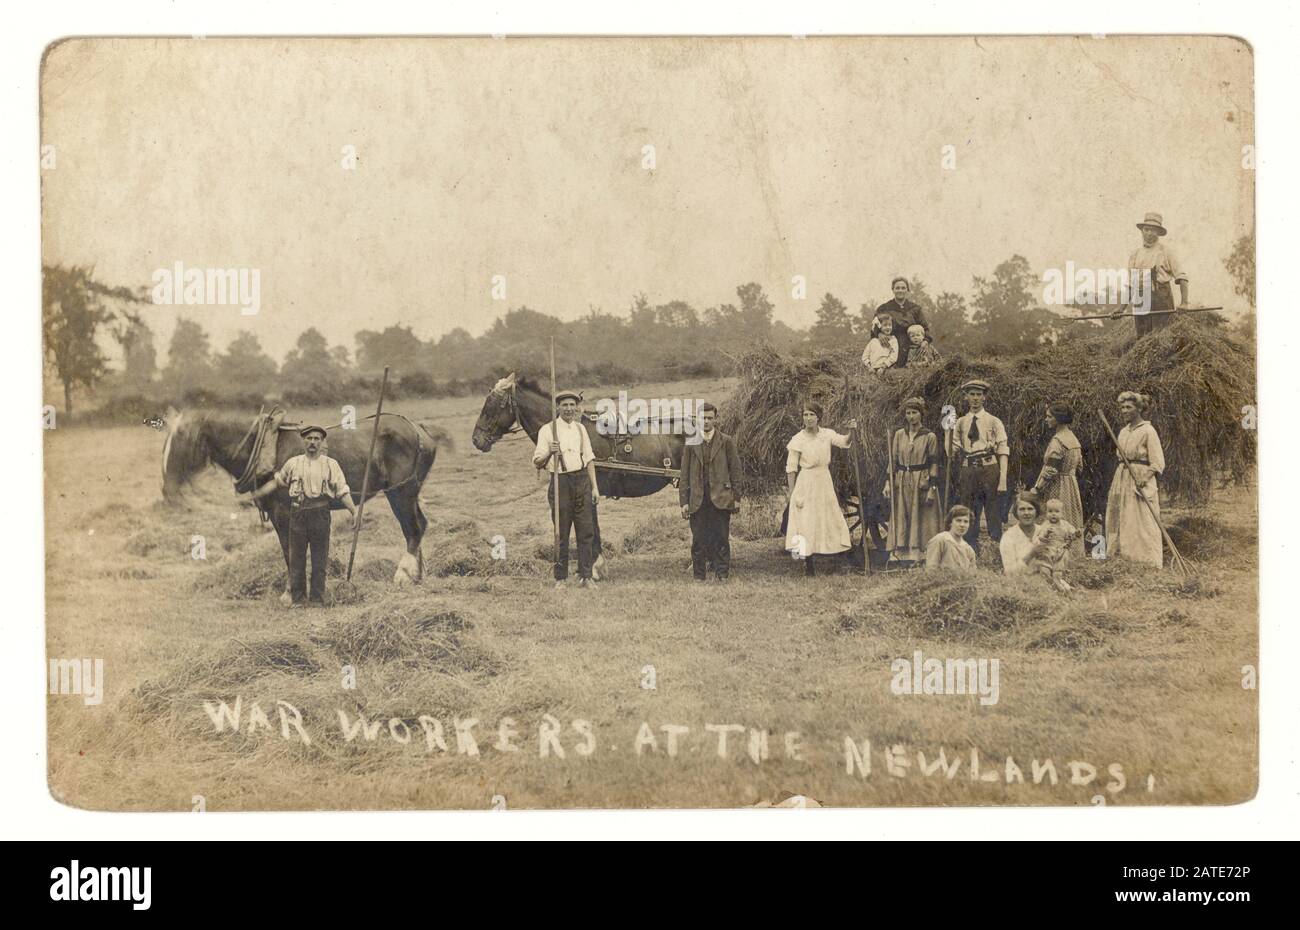 WW1 era postcard of farm workers with several Land Girls who are wearing Land Army armbands to distinguish them from the farm labourers and to show that they are on active war service. Photo taken at the Newlands, circa 1917, U.K. Stock Photo